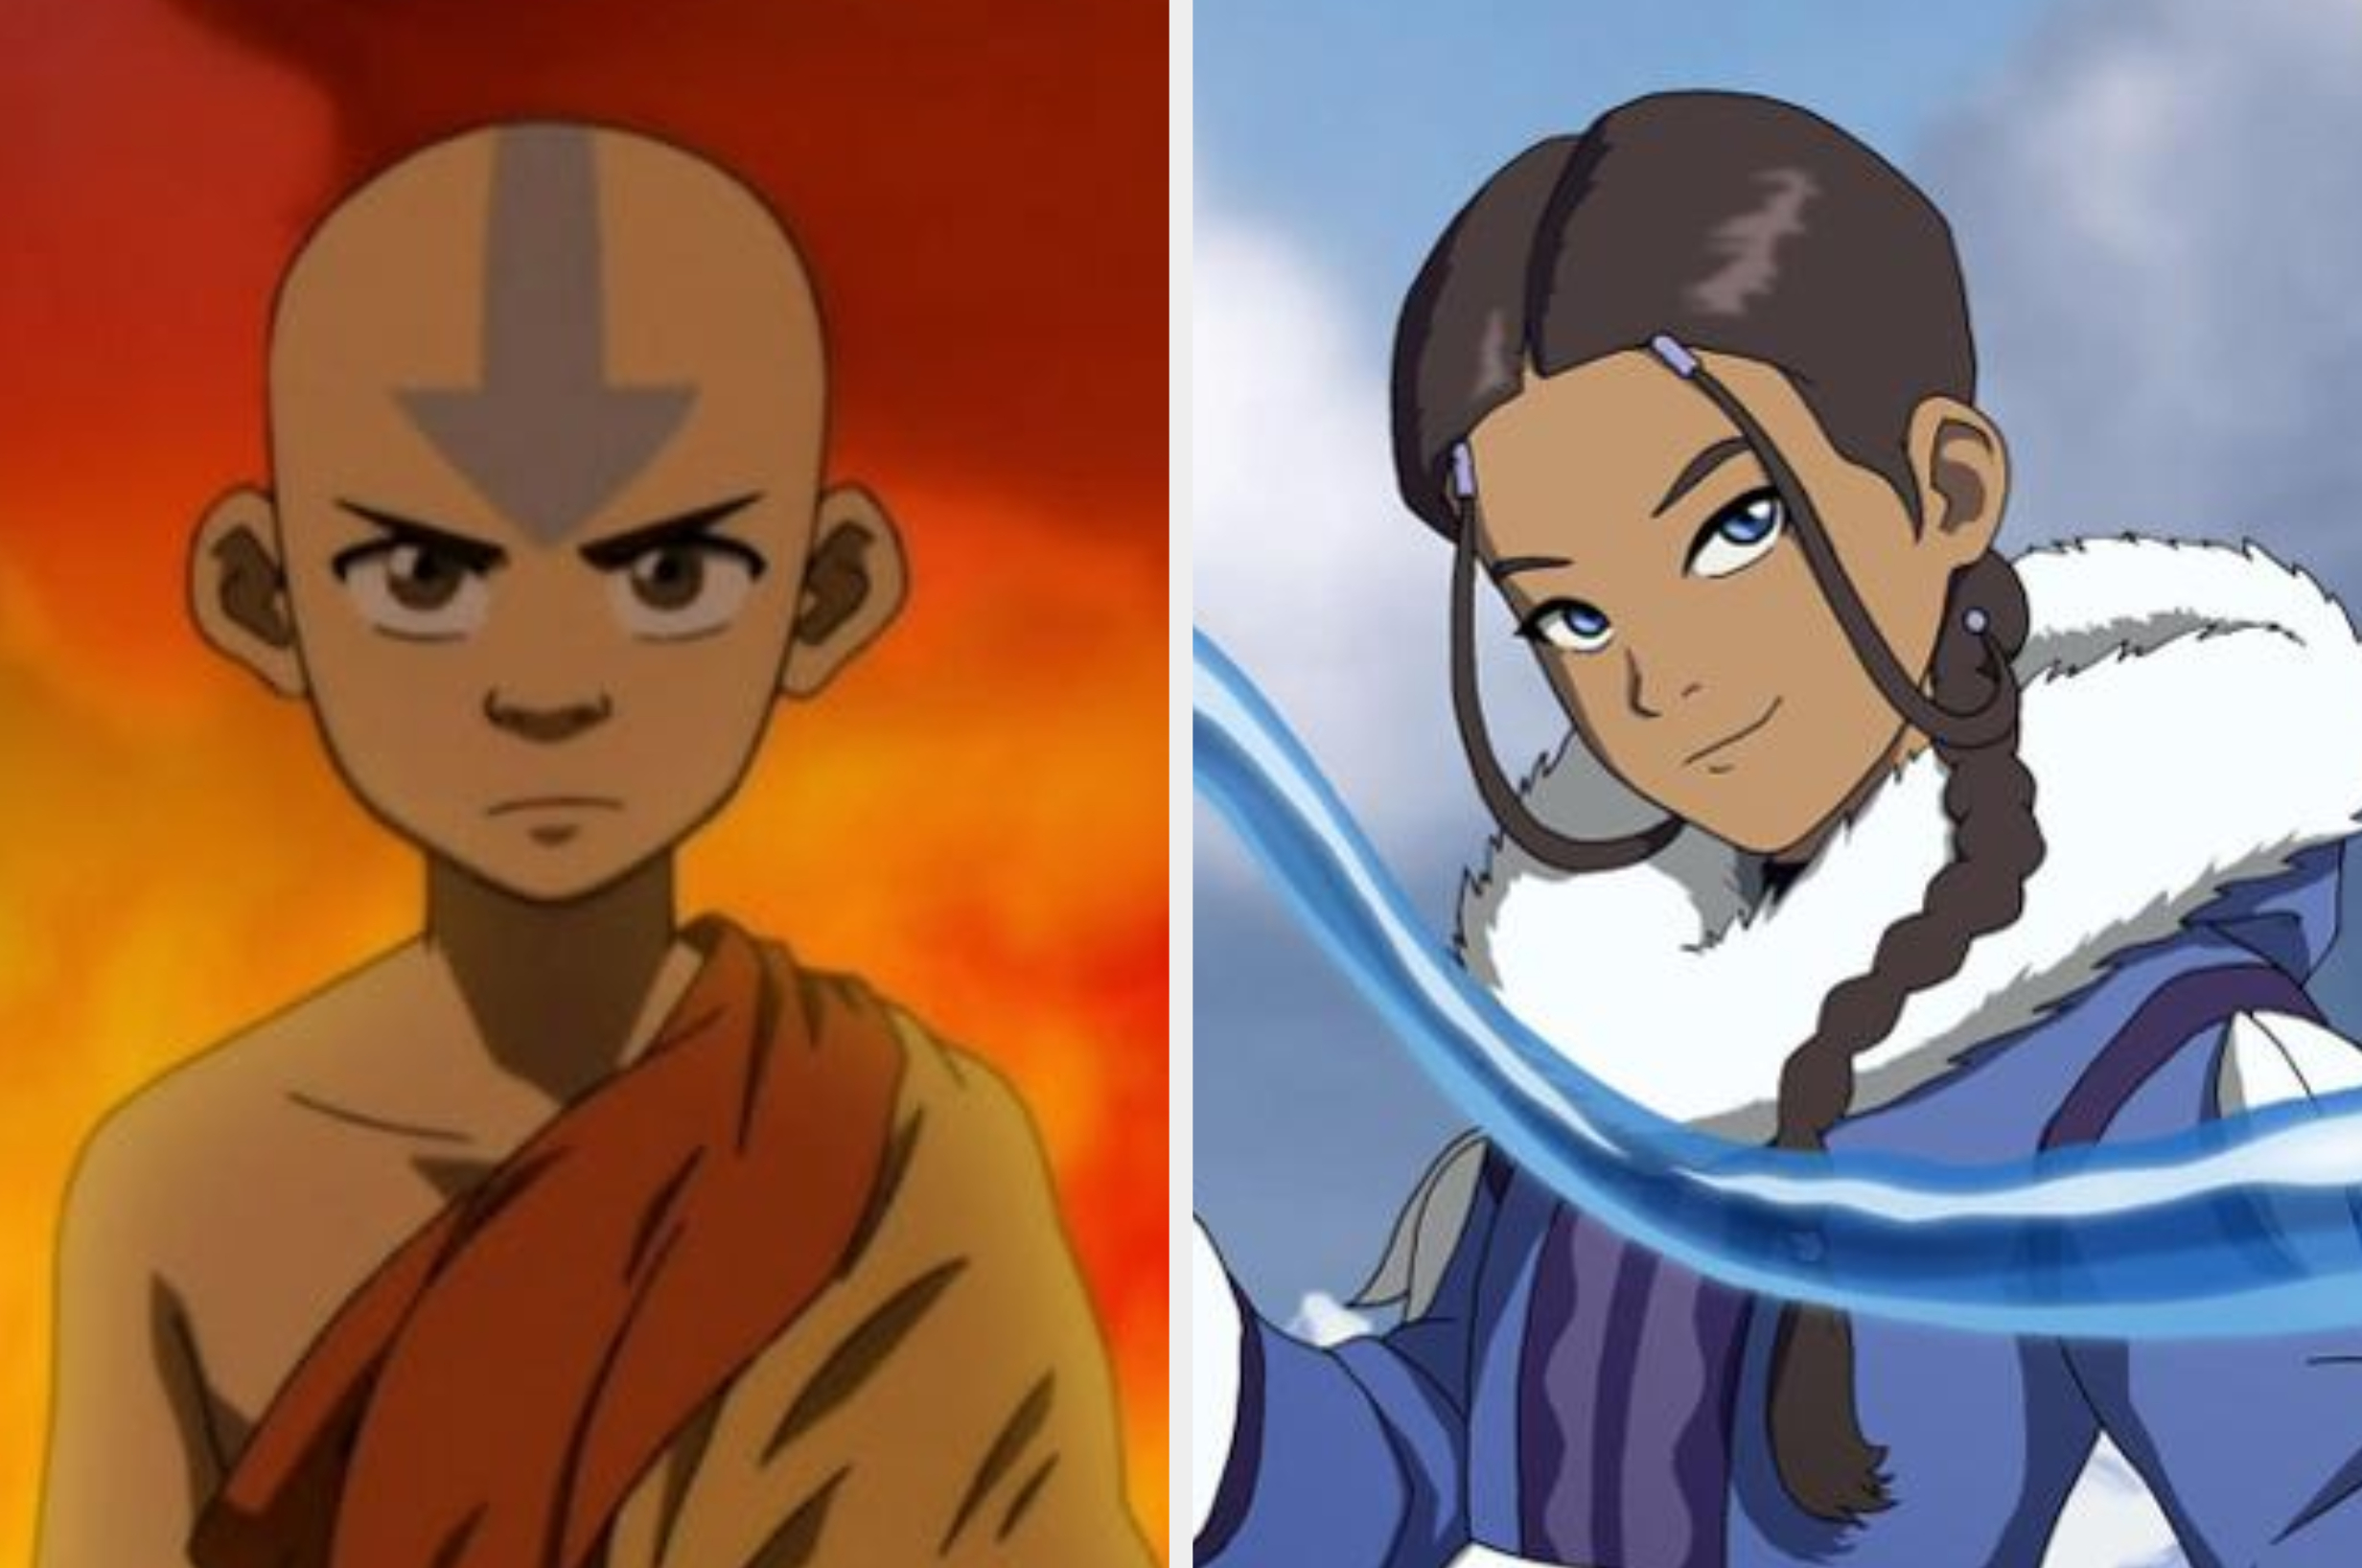 Avatar The Last Airbender Character Quiz